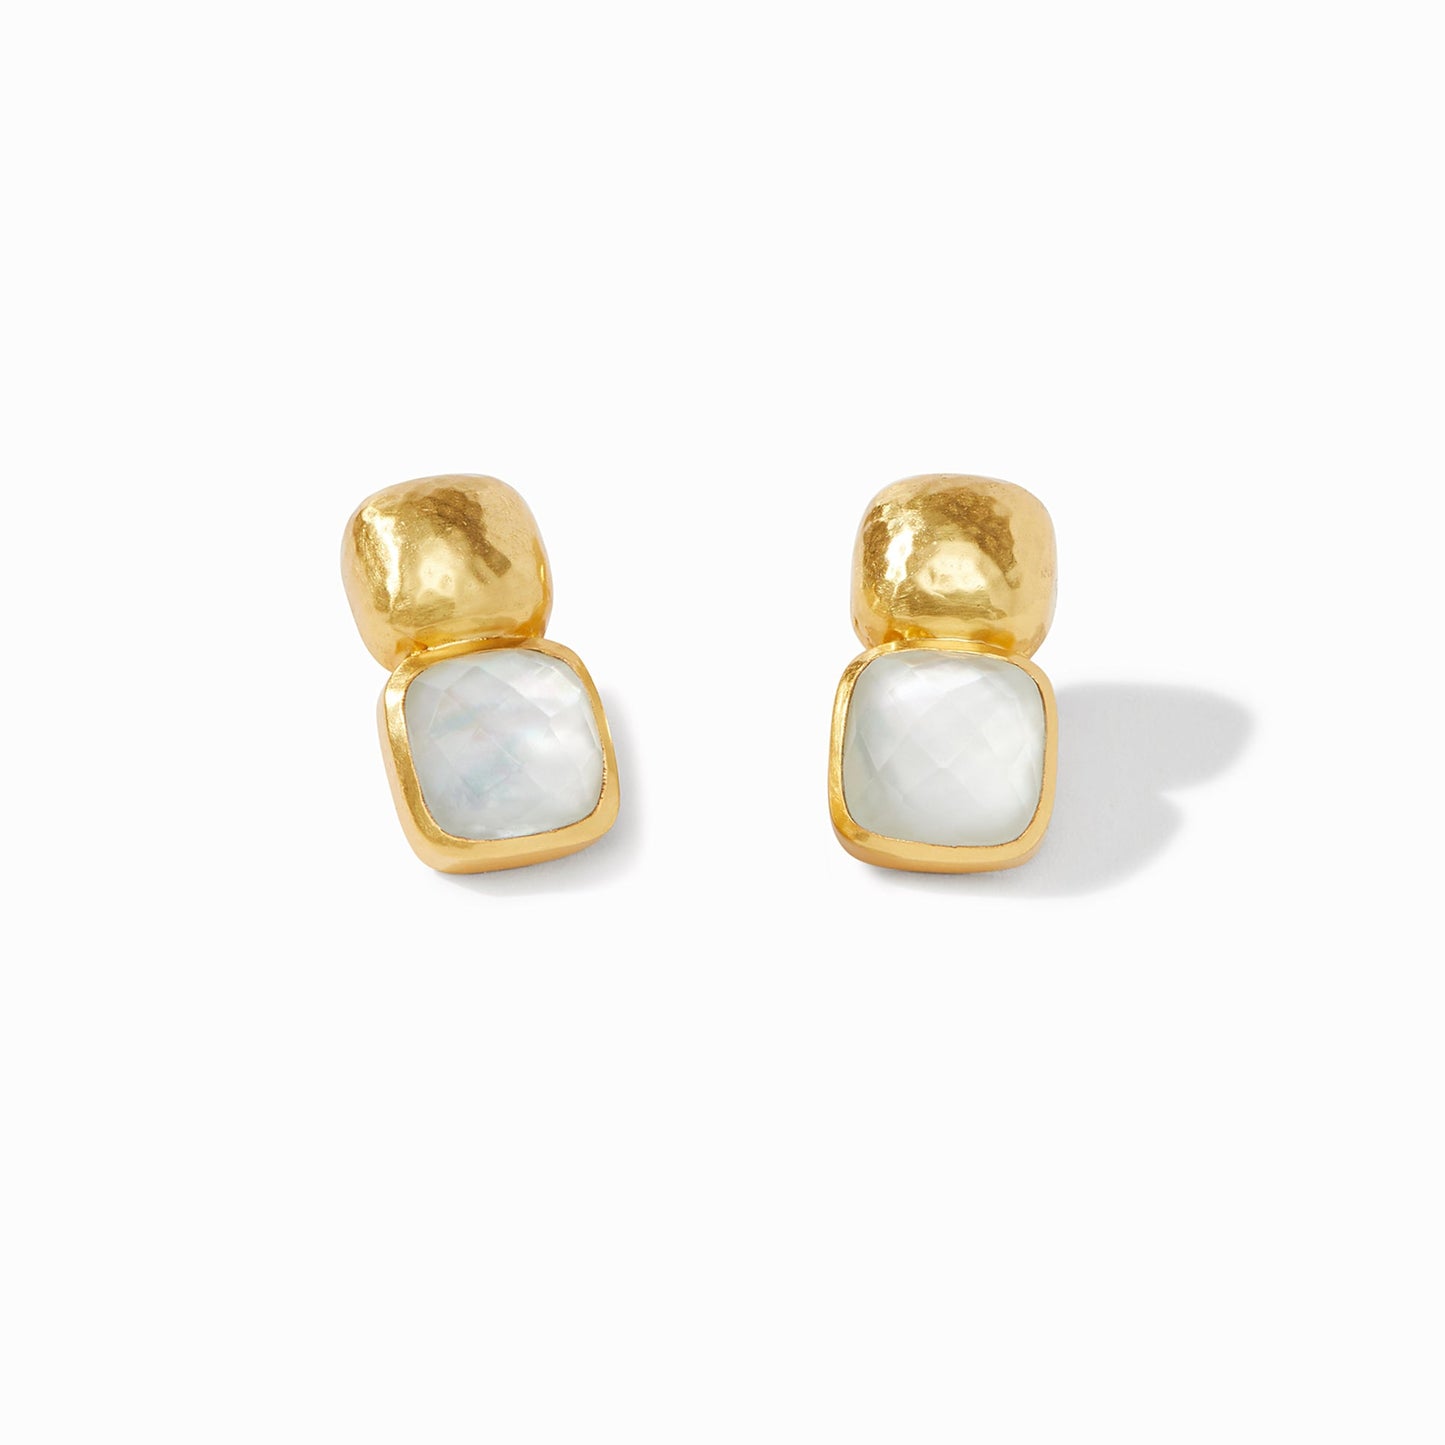 Julie Vos “Catalina” Earring-Gold Iridescent Clear Crystal